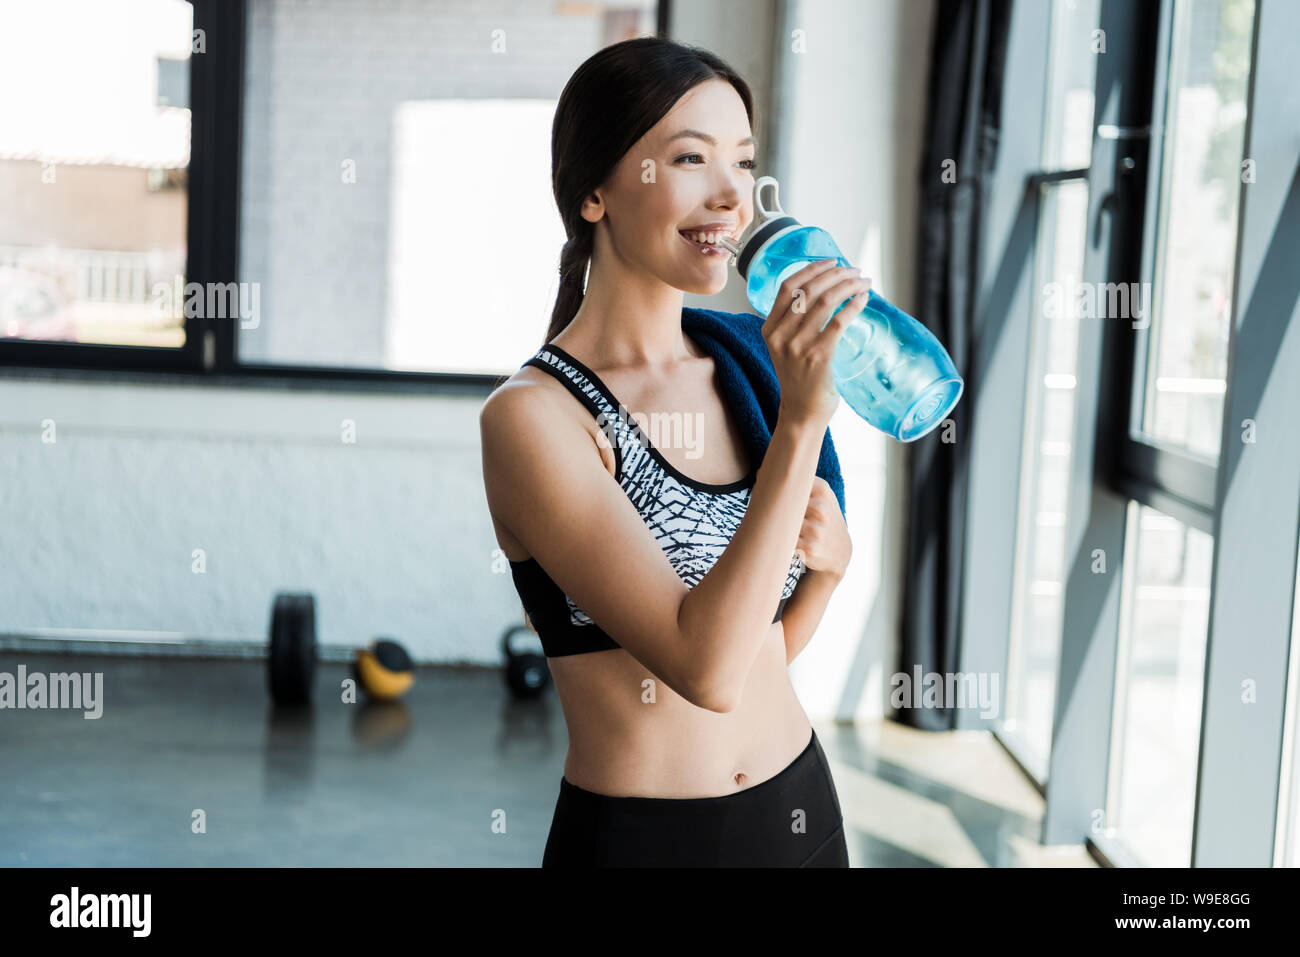 https://c8.alamy.com/comp/W9E8GG/happy-girl-drinking-water-while-holding-sport-bottle-in-gym-W9E8GG.jpg